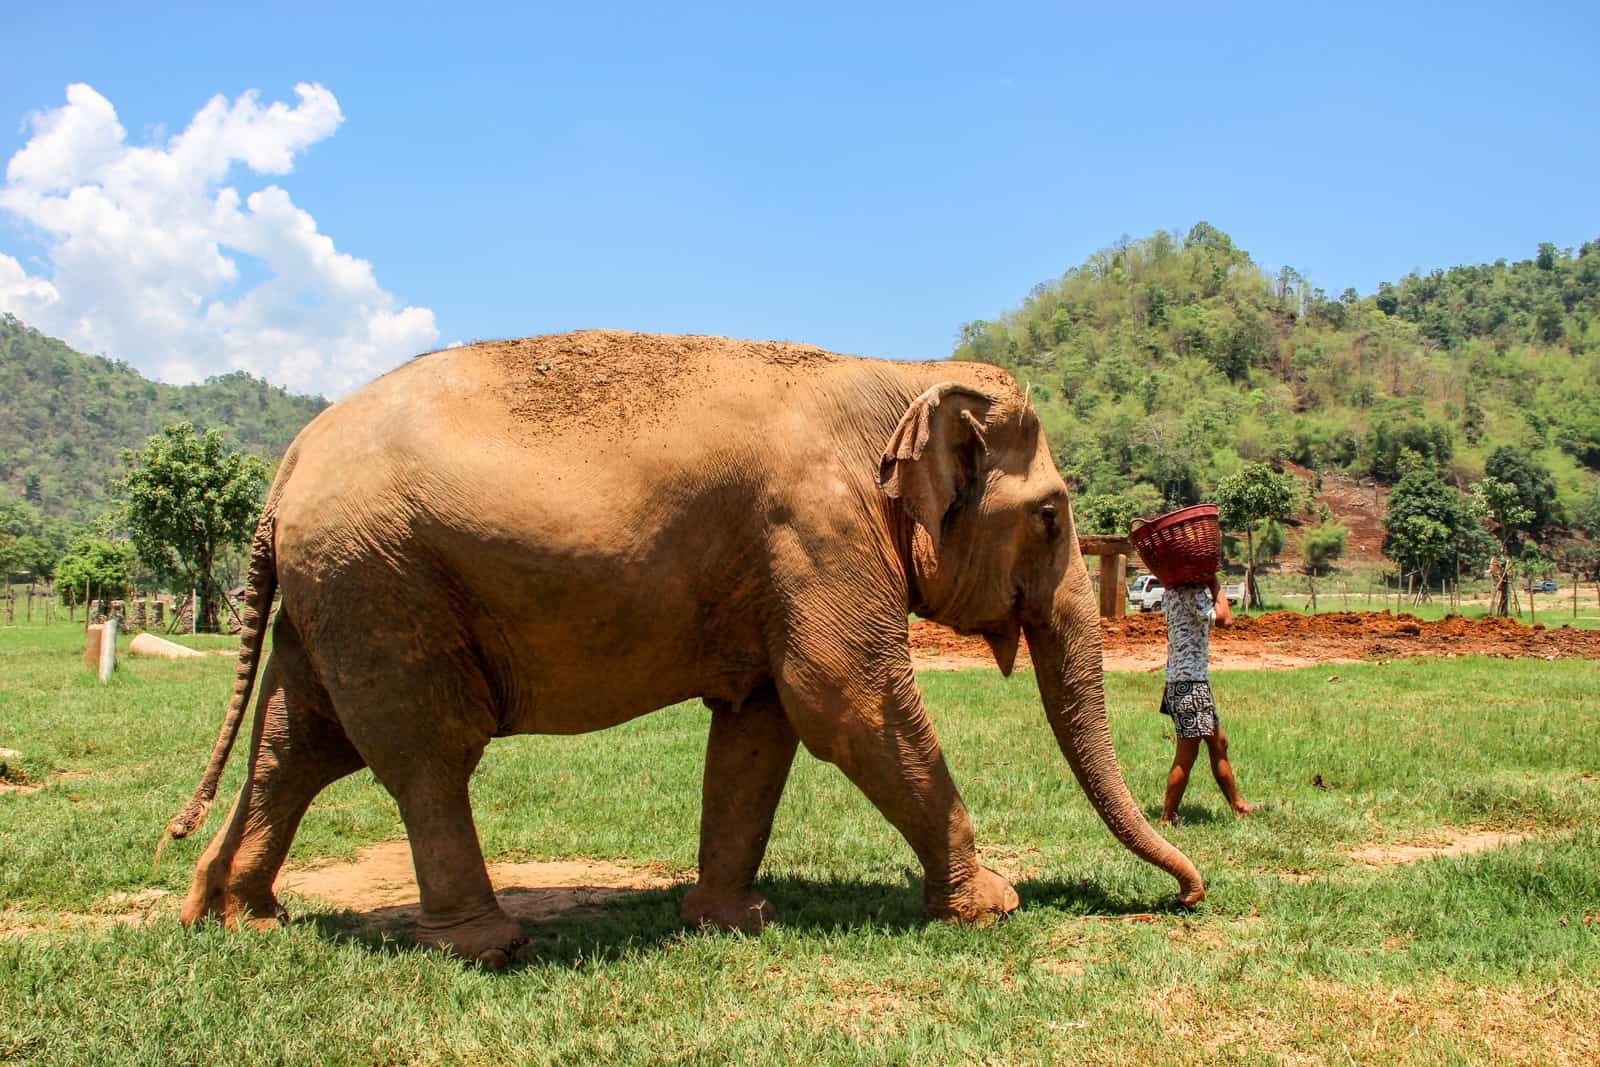 An elephant walks next to a man in the green conservation park in Thailand.